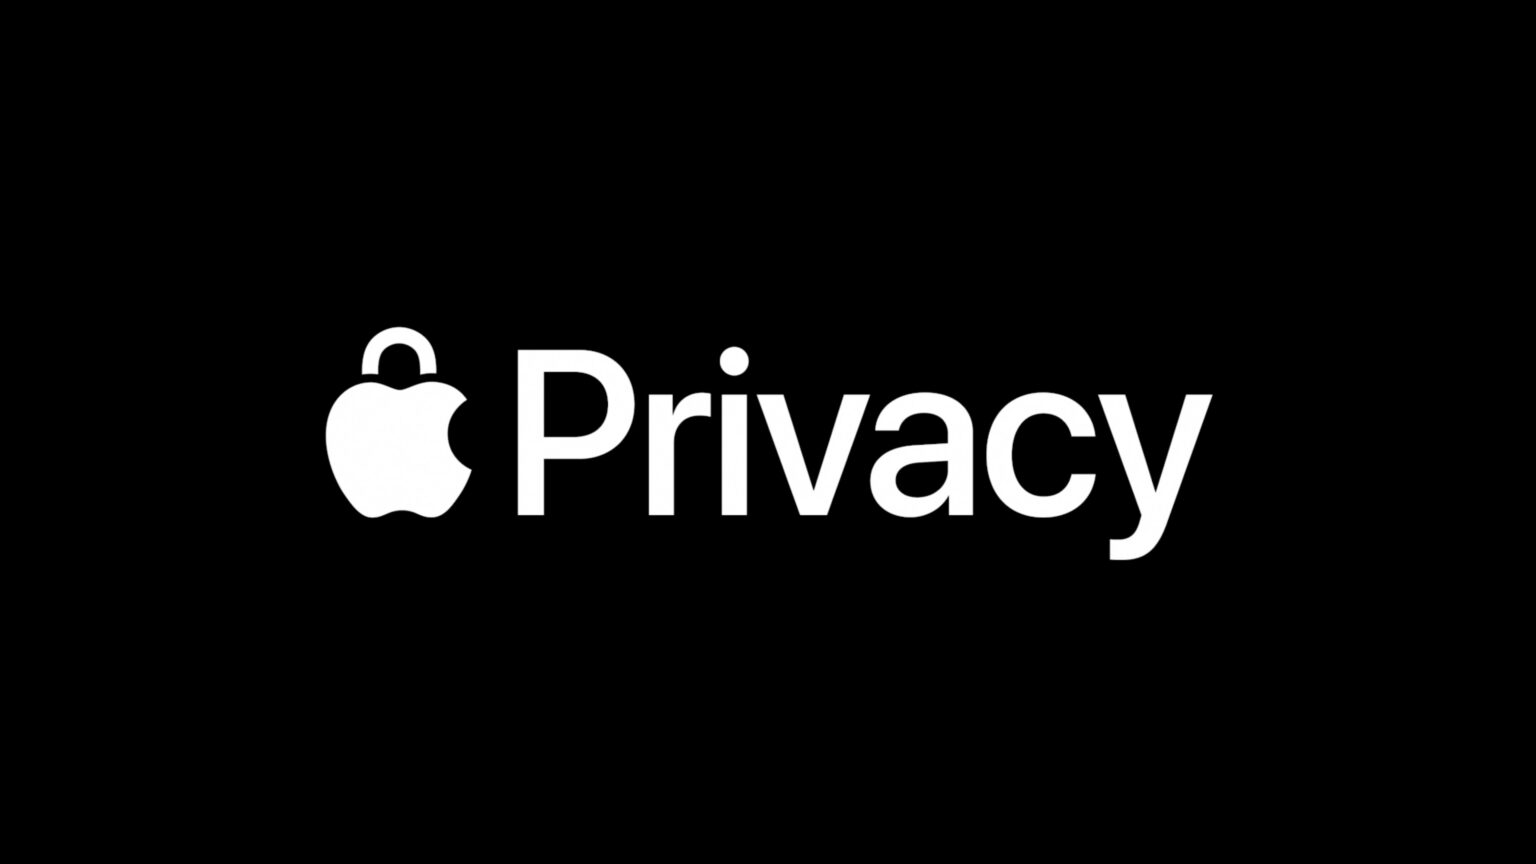 During the WWDC 2020 keynote, Apple doubled down on its commitment to privacy.